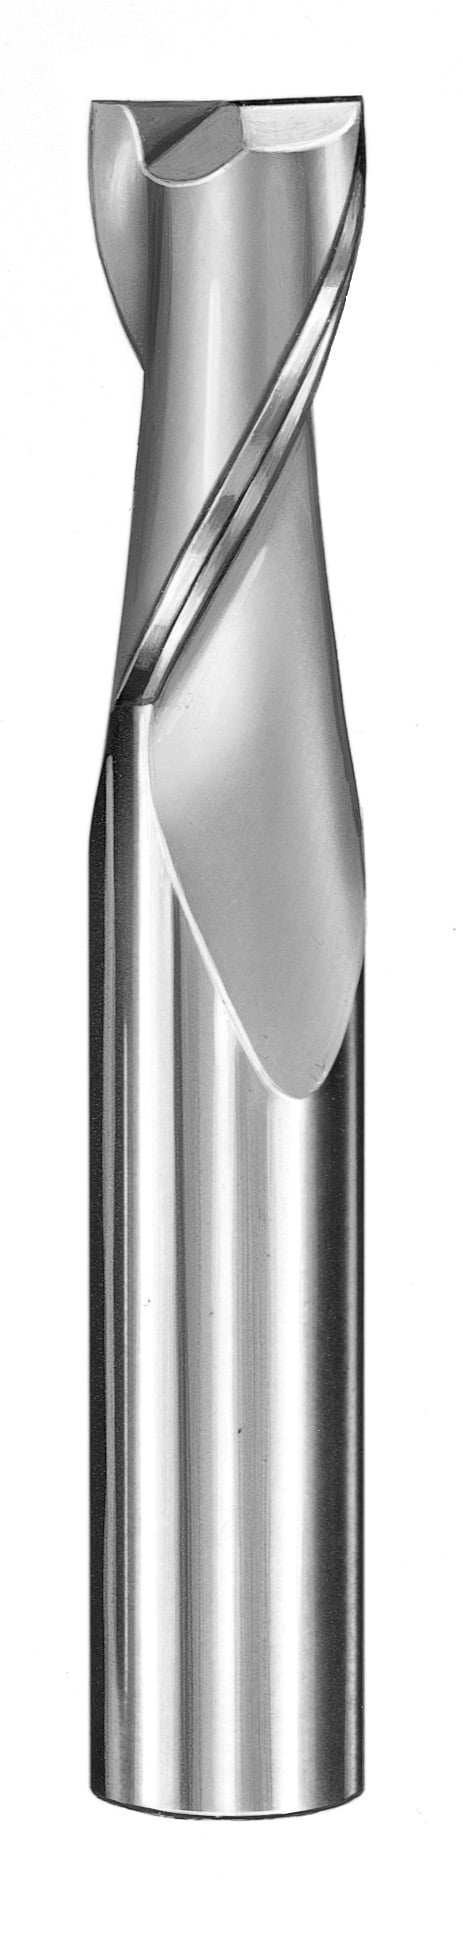 13/64" Dia, 2 Flute, Square End End Mill - 30325